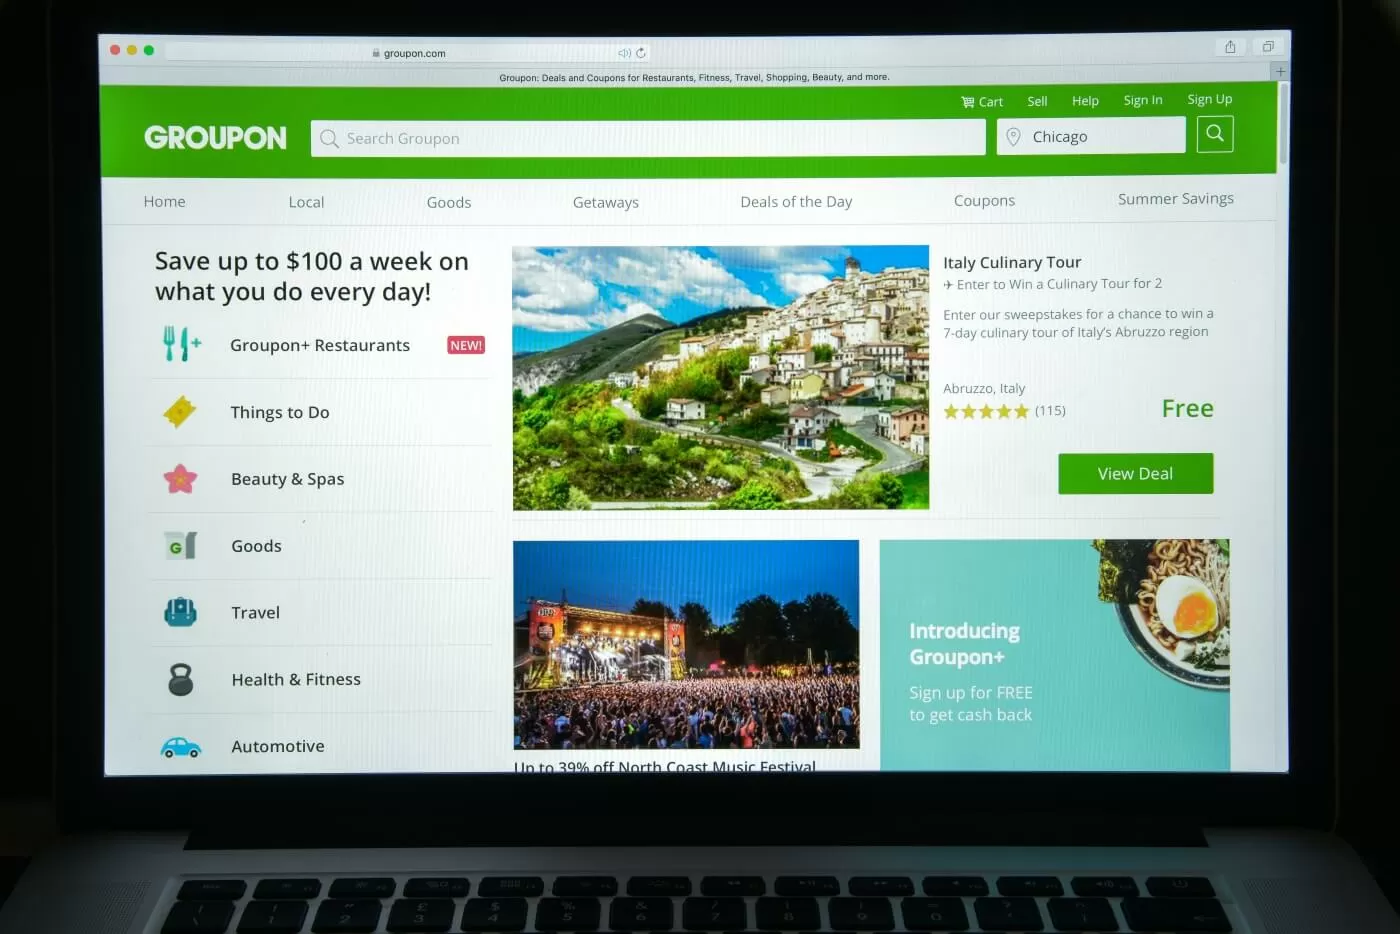 Groupon will no longer sell discounted goods, instead focusing on local experiences